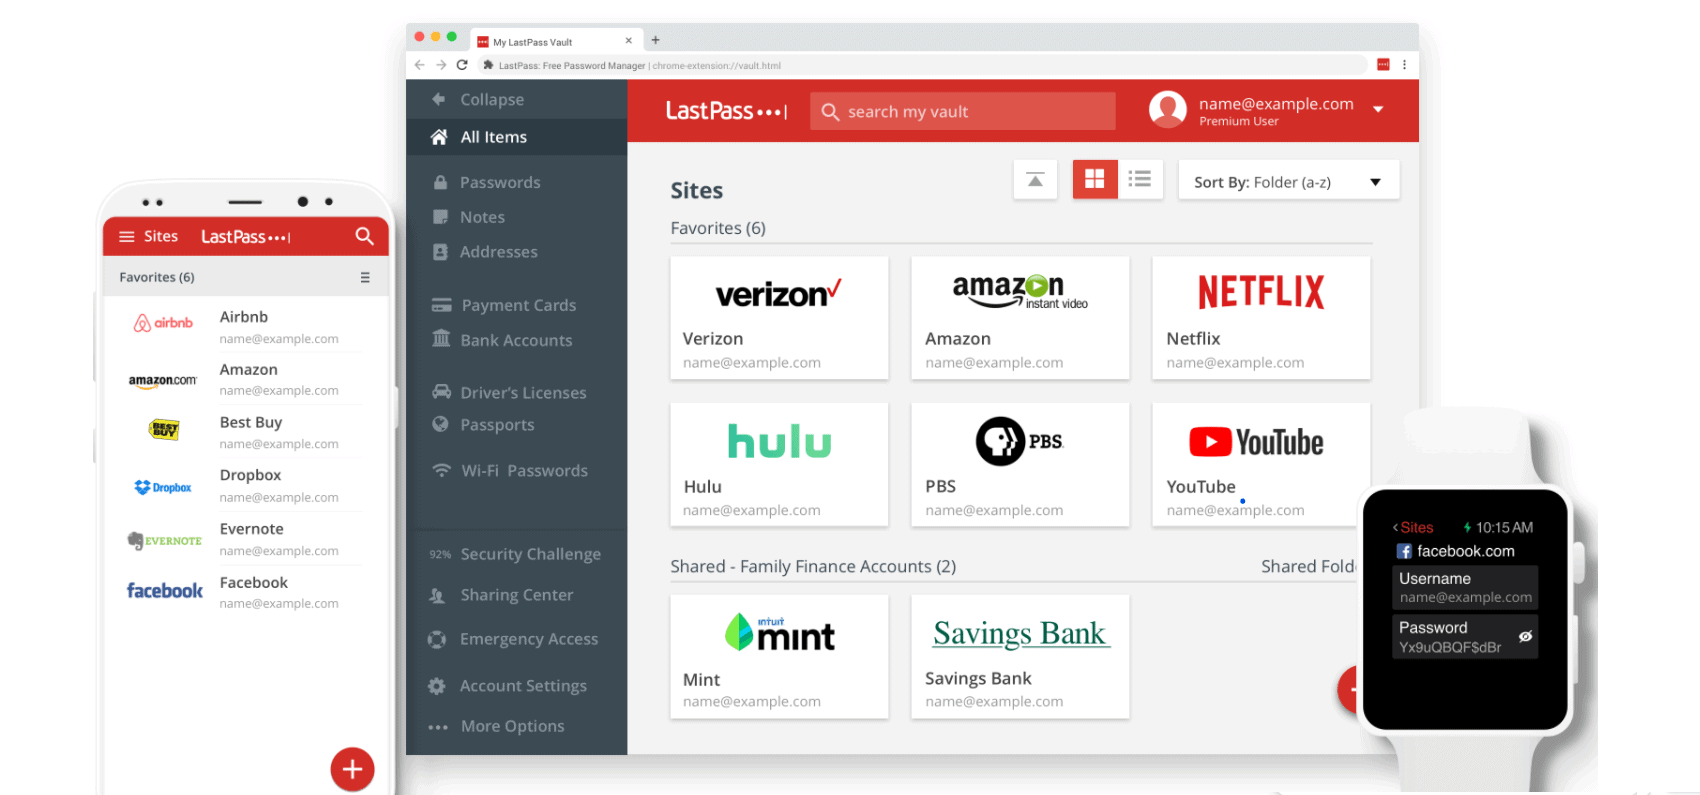 How To Protect And Manage Password - LastPass Review